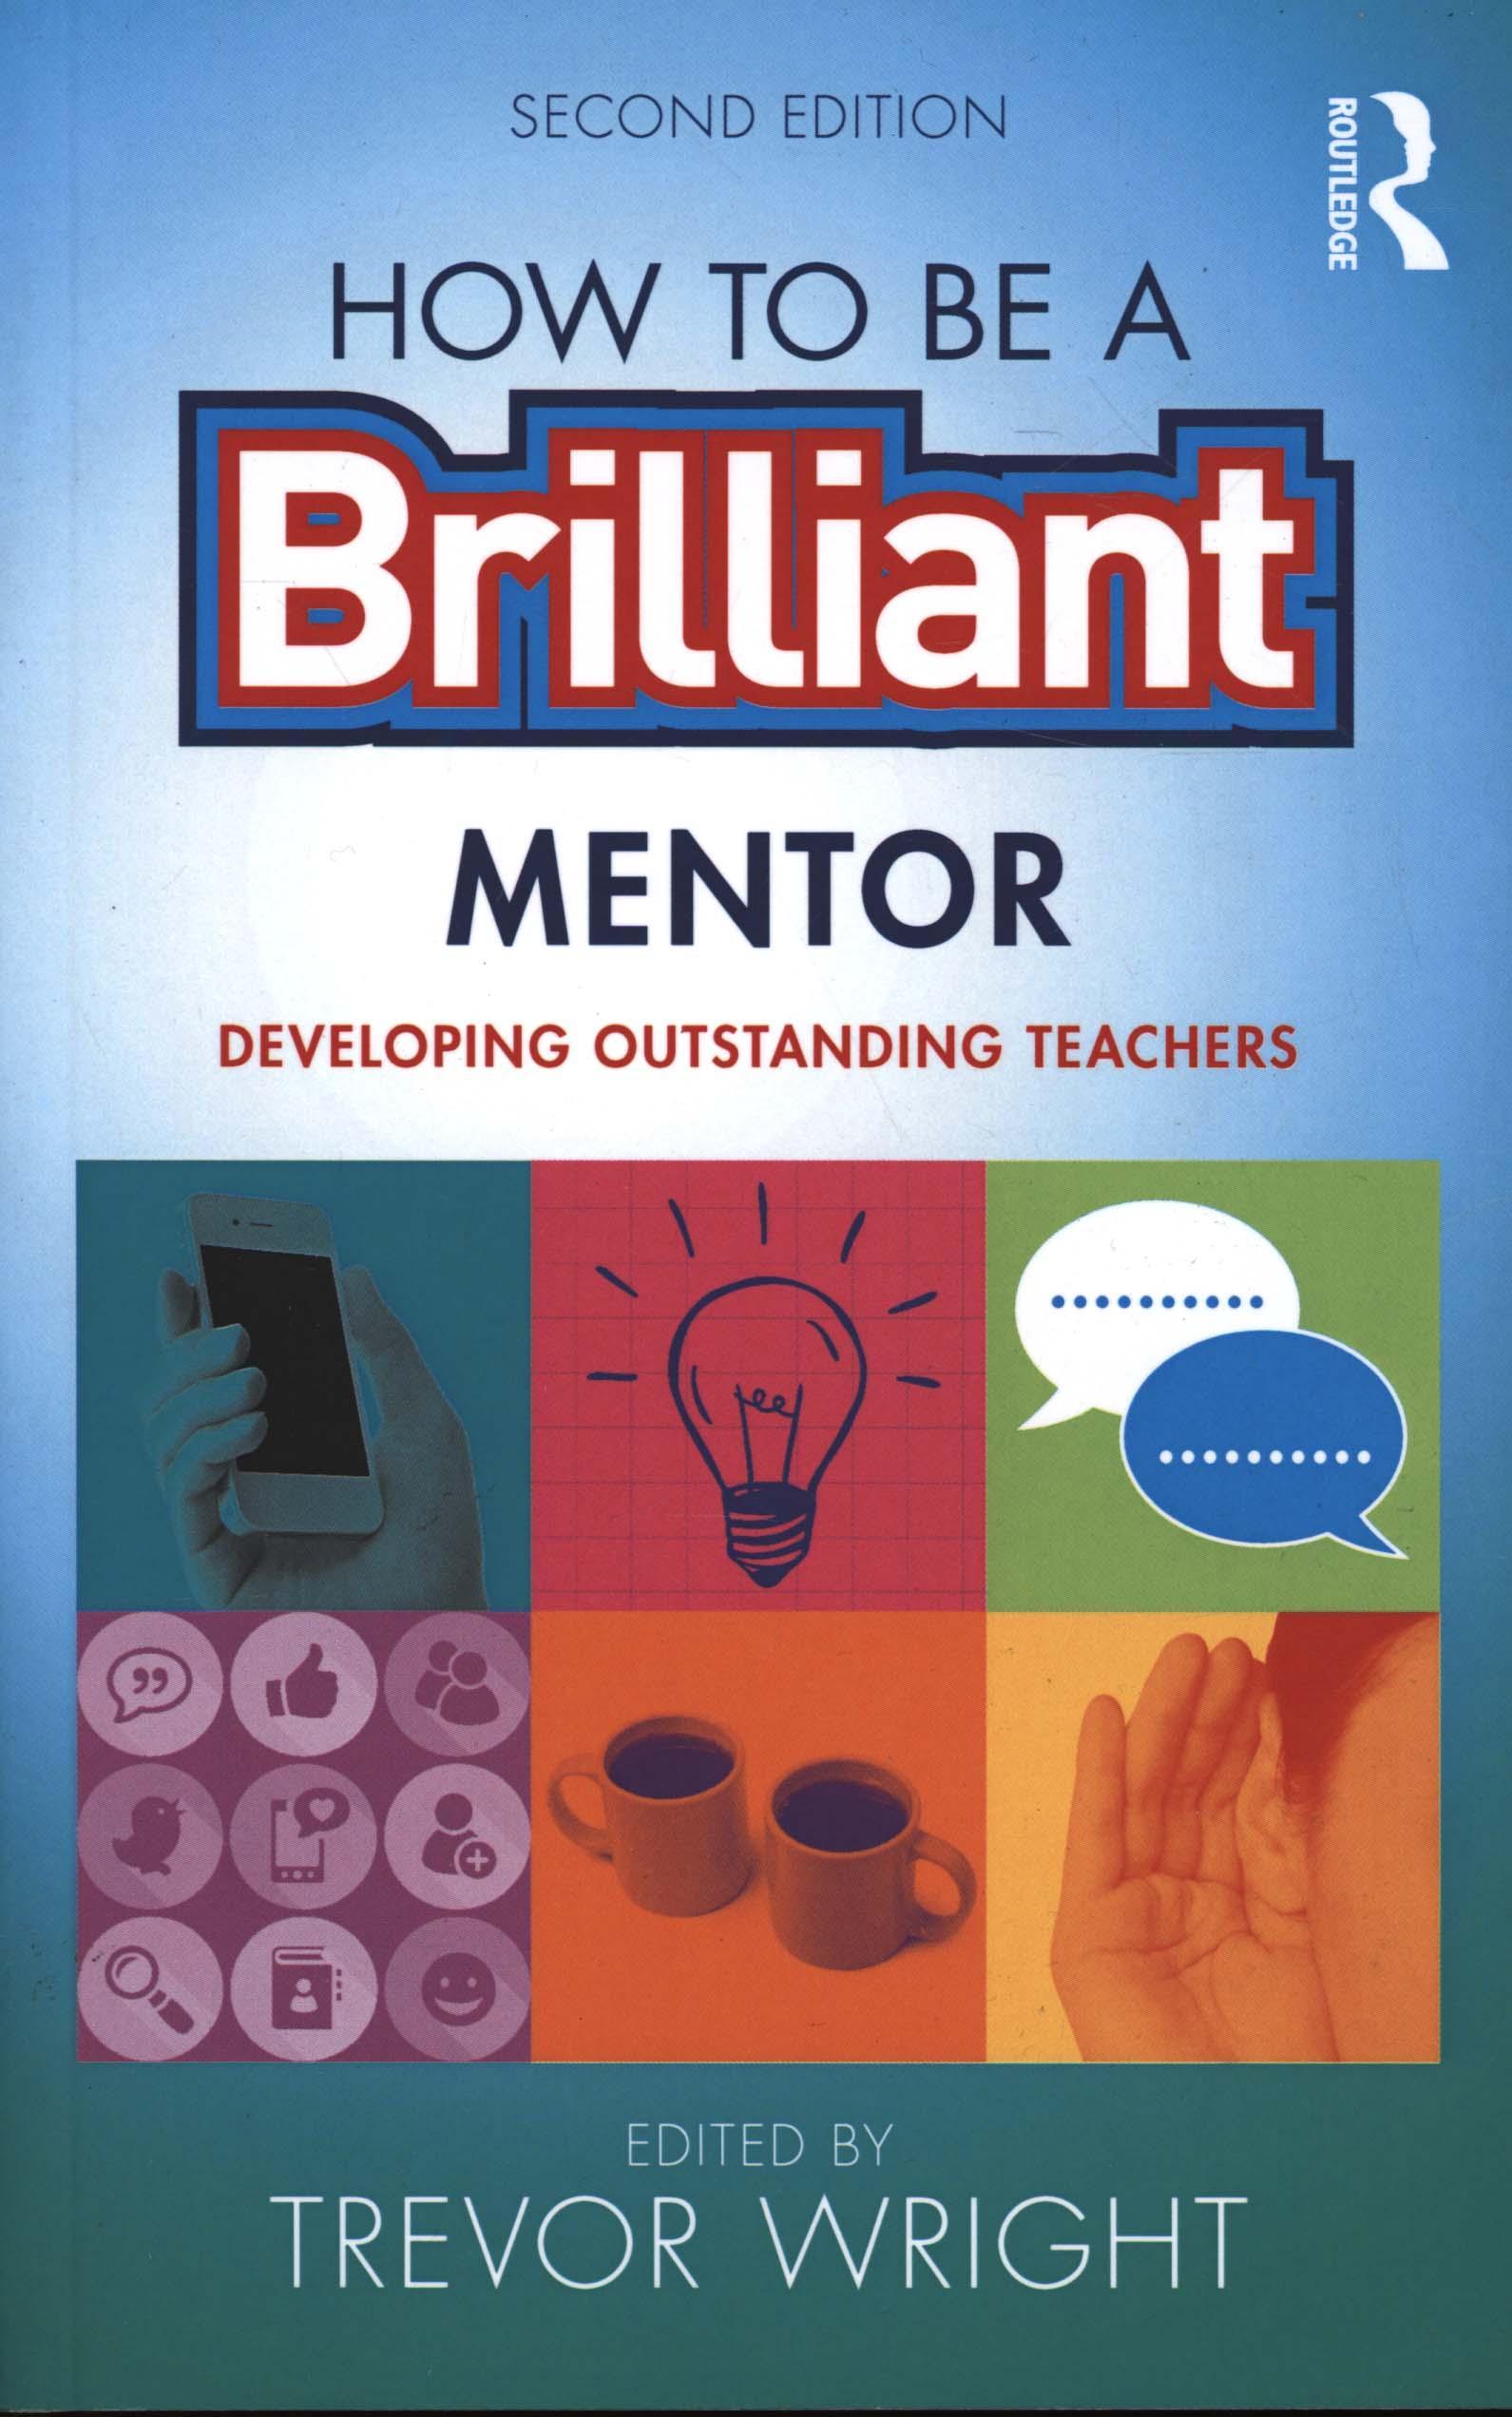 How to be a Brilliant Mentor